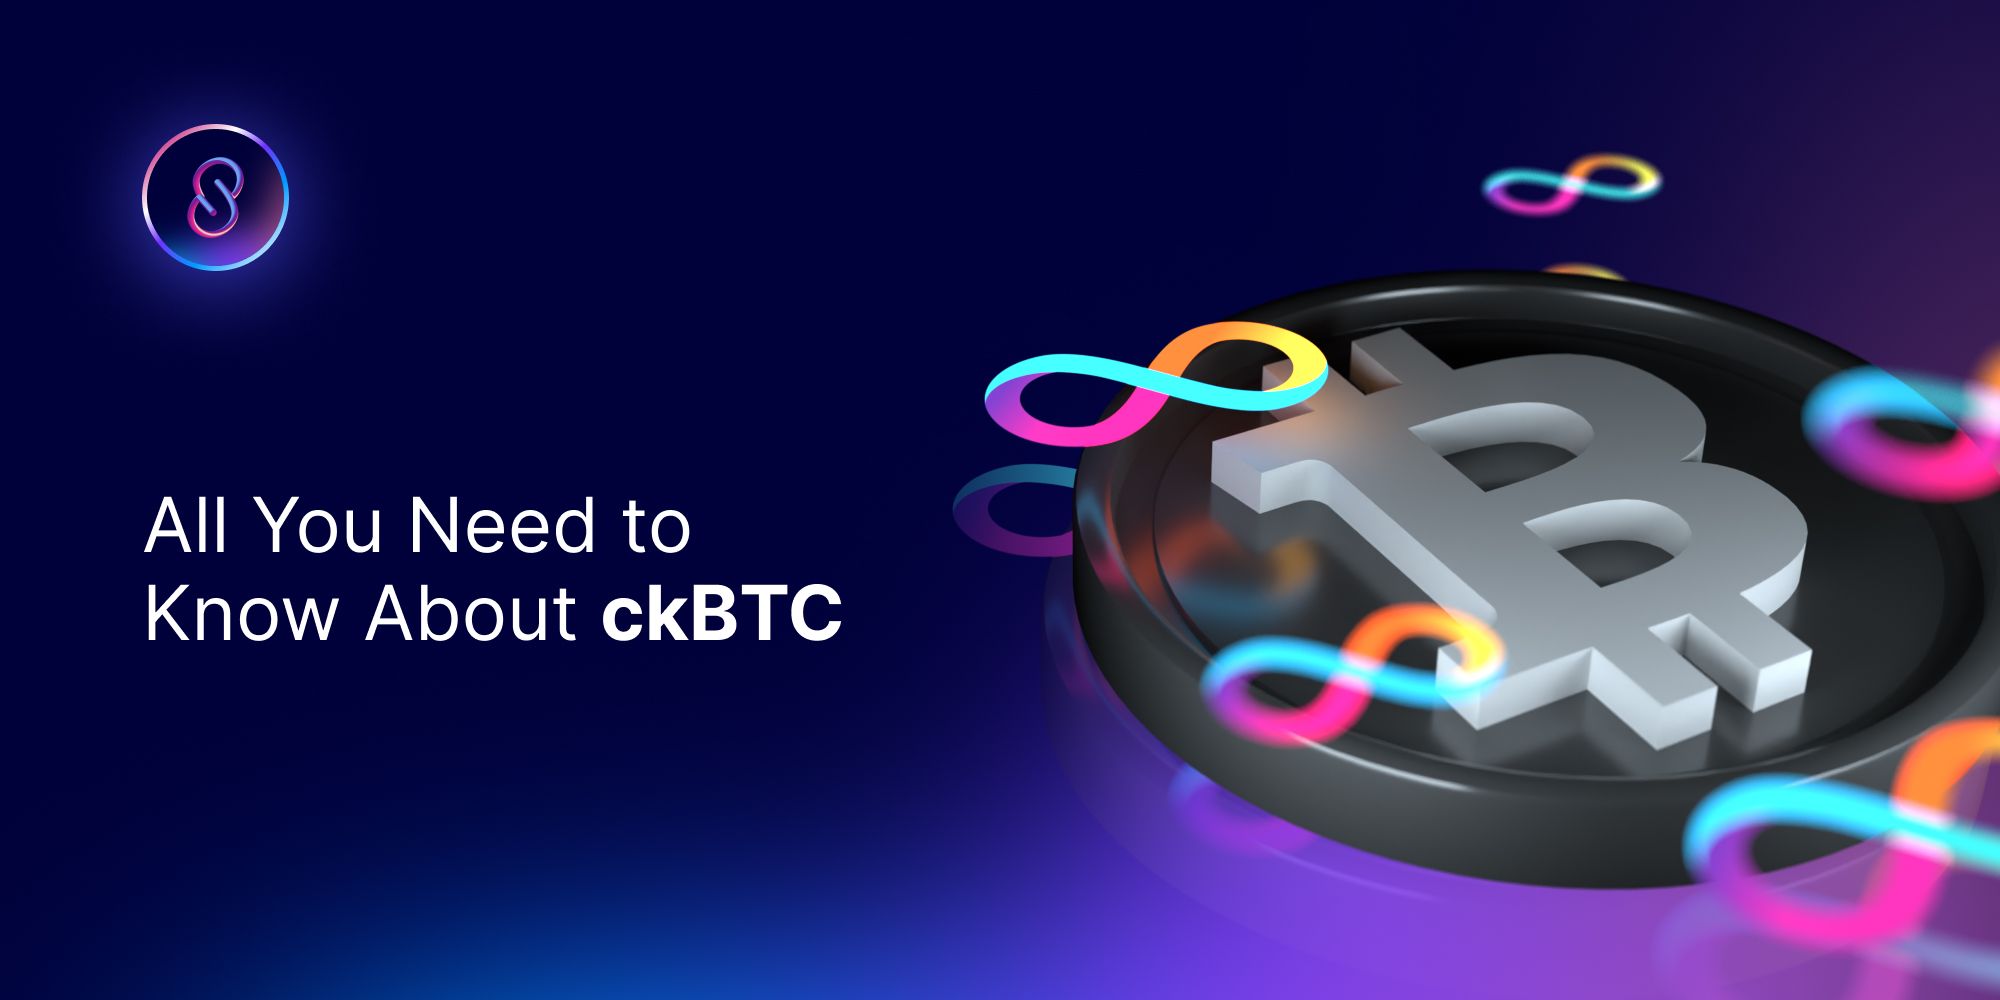 All You Need to Know About ckBTC